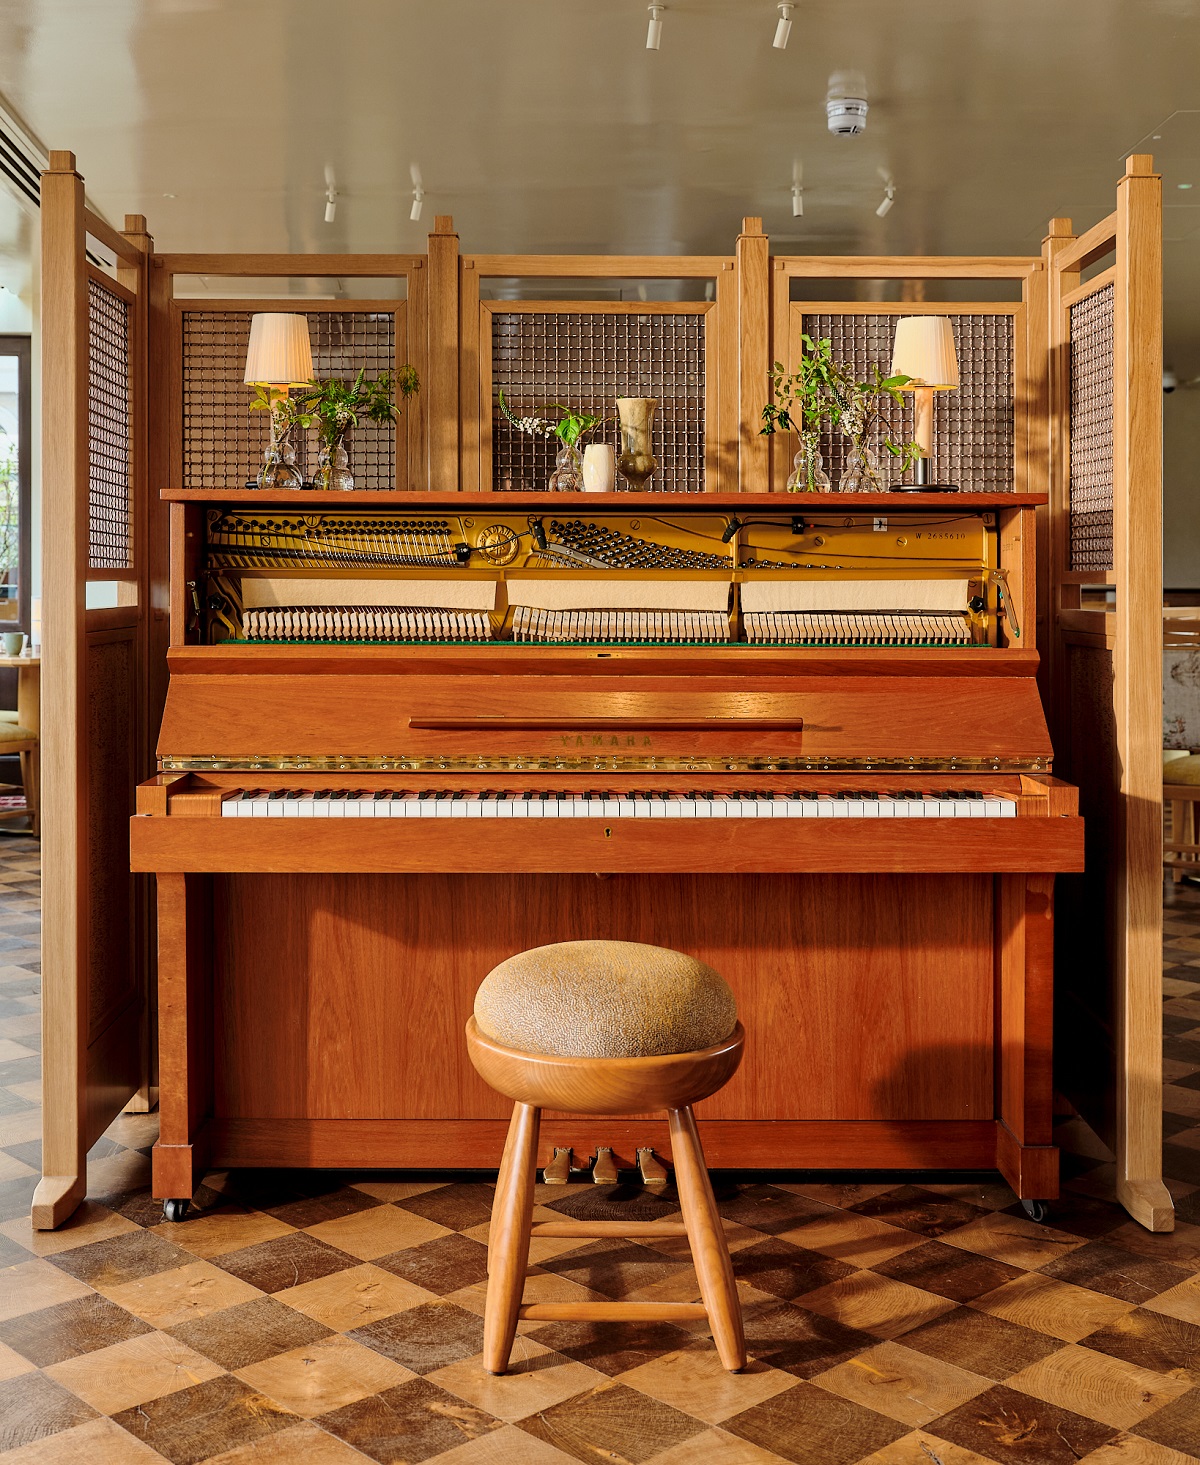 checked floor, vintage piano and wooden stool in Kioku